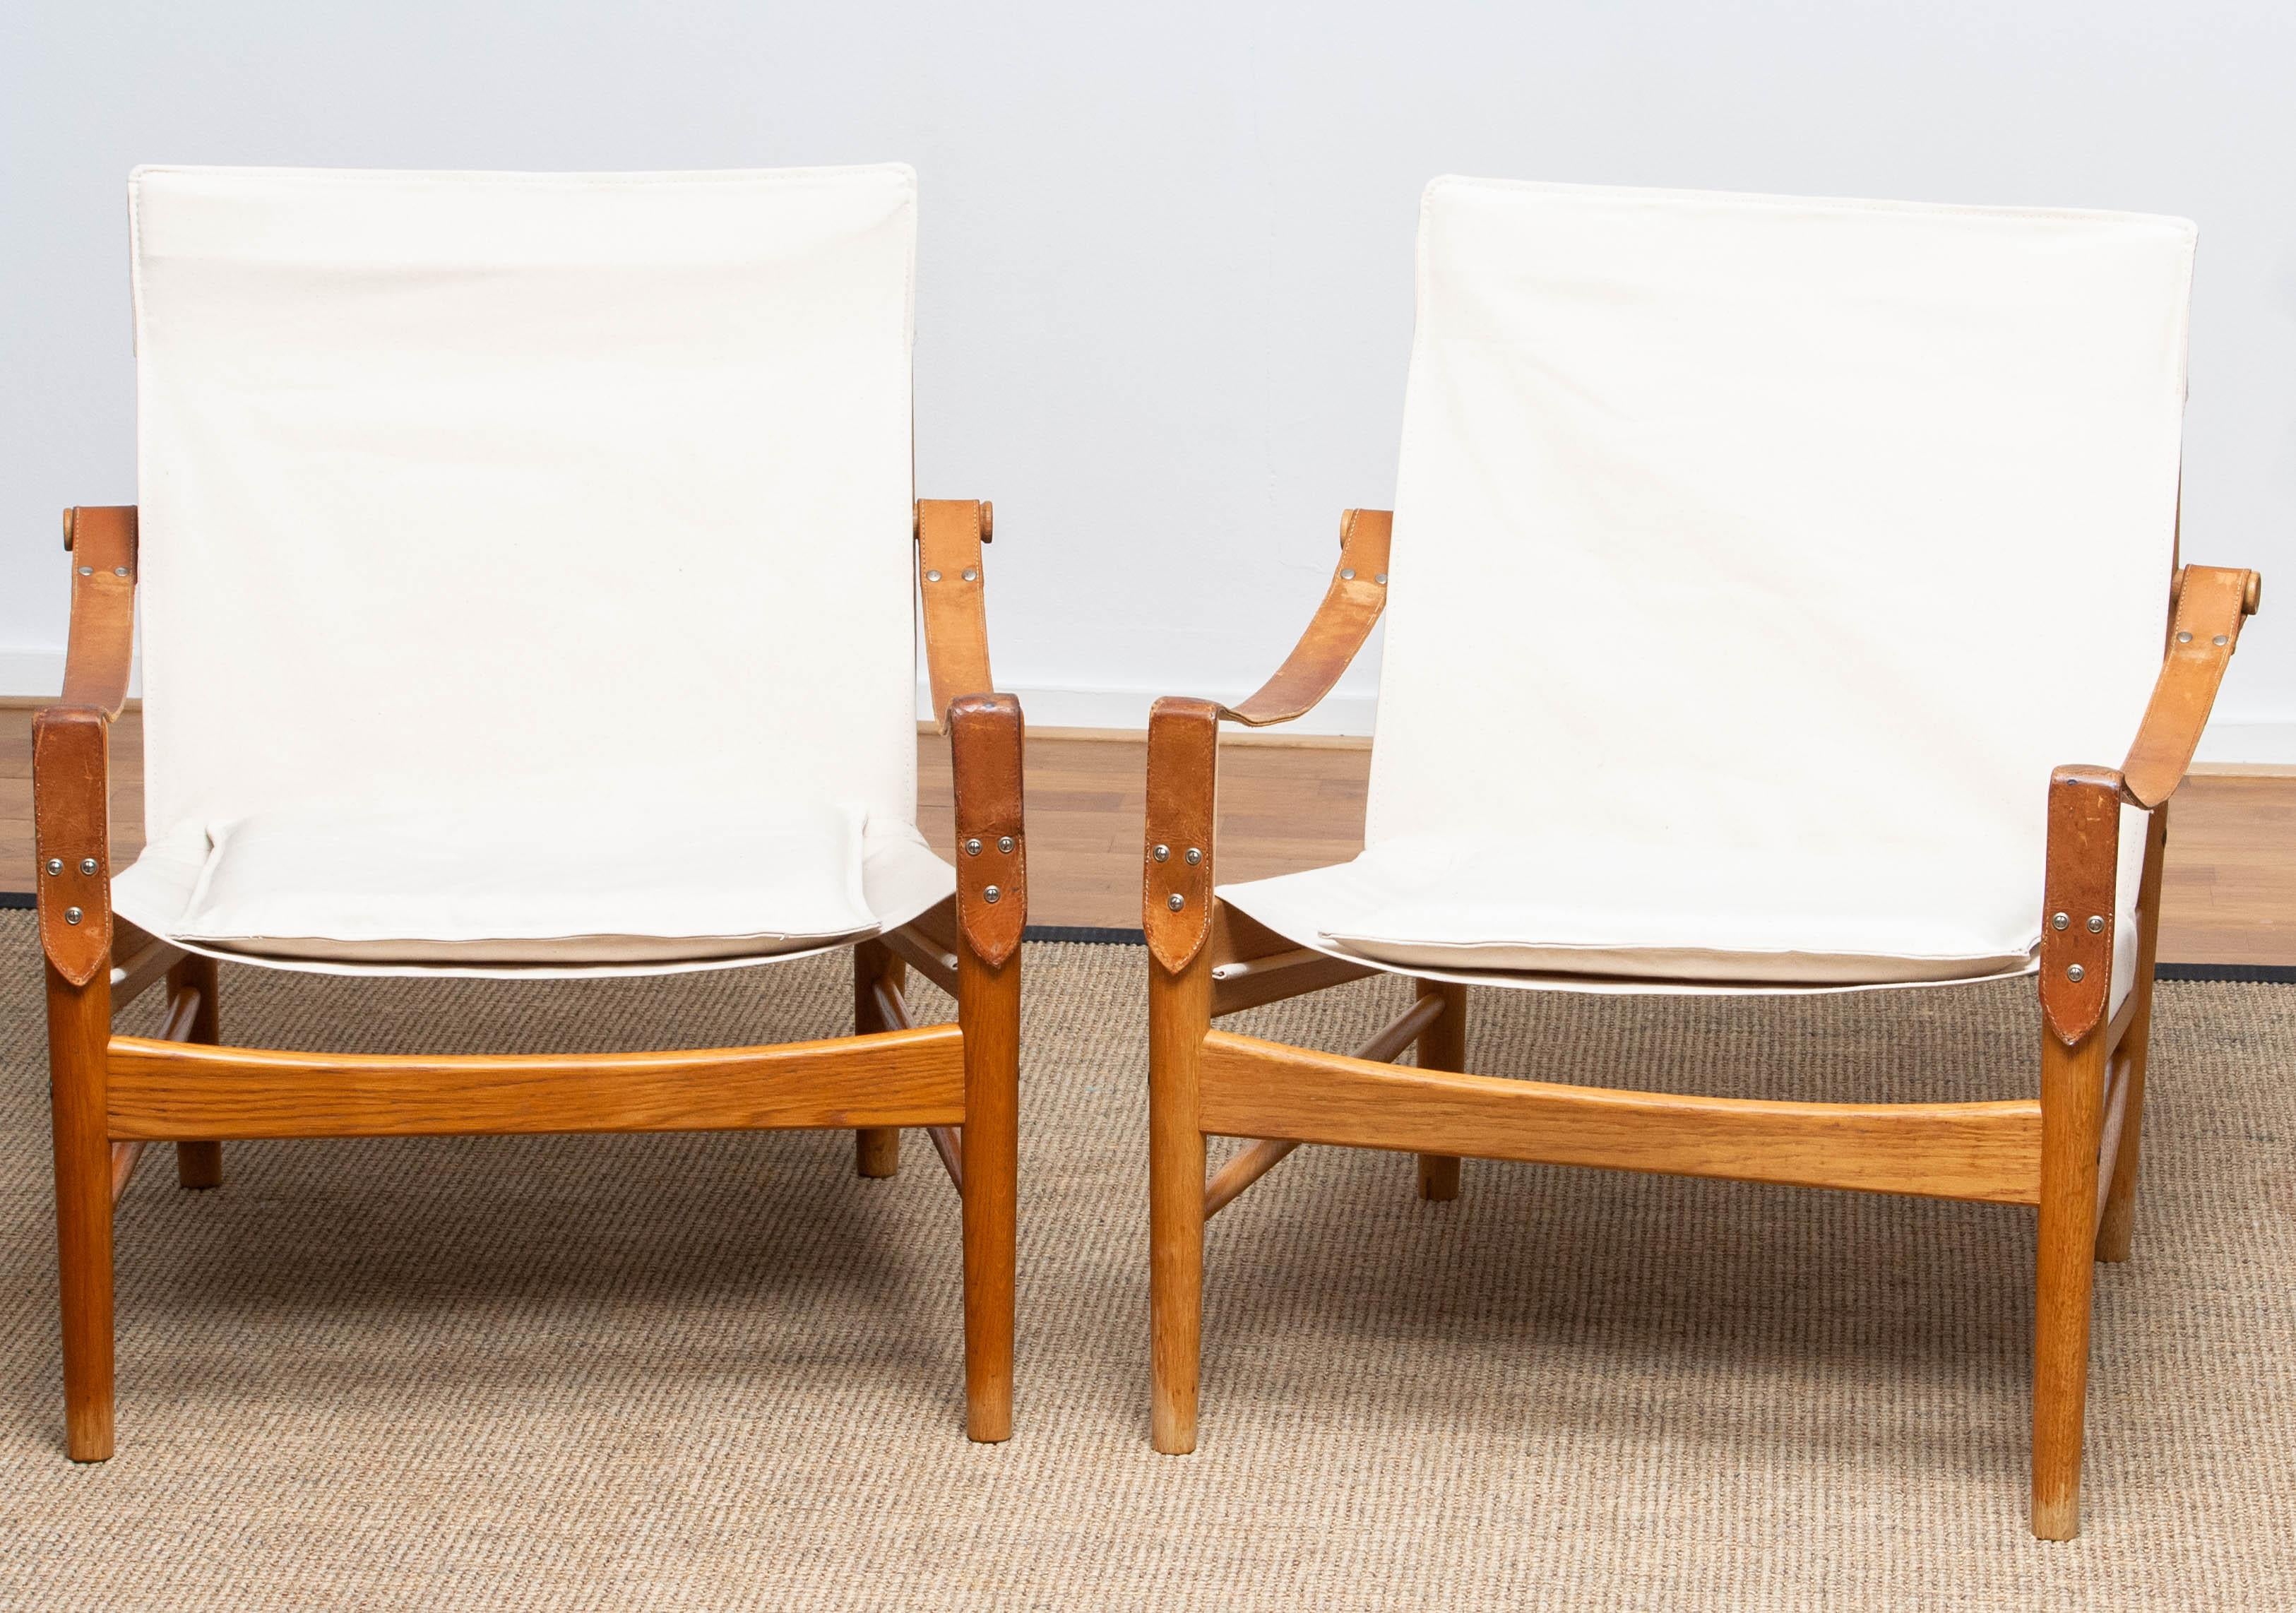 Beautiful pair of safari chairs designed by Hans Olsen for Viska Möbler in Kinna, Sweden.
These chairs are made of oak with a new canvas upholstery.
They are in a wonderful condition and marked.
Period: 1960s.
Dimensions: H 81 cm, W 73 cm, D 70